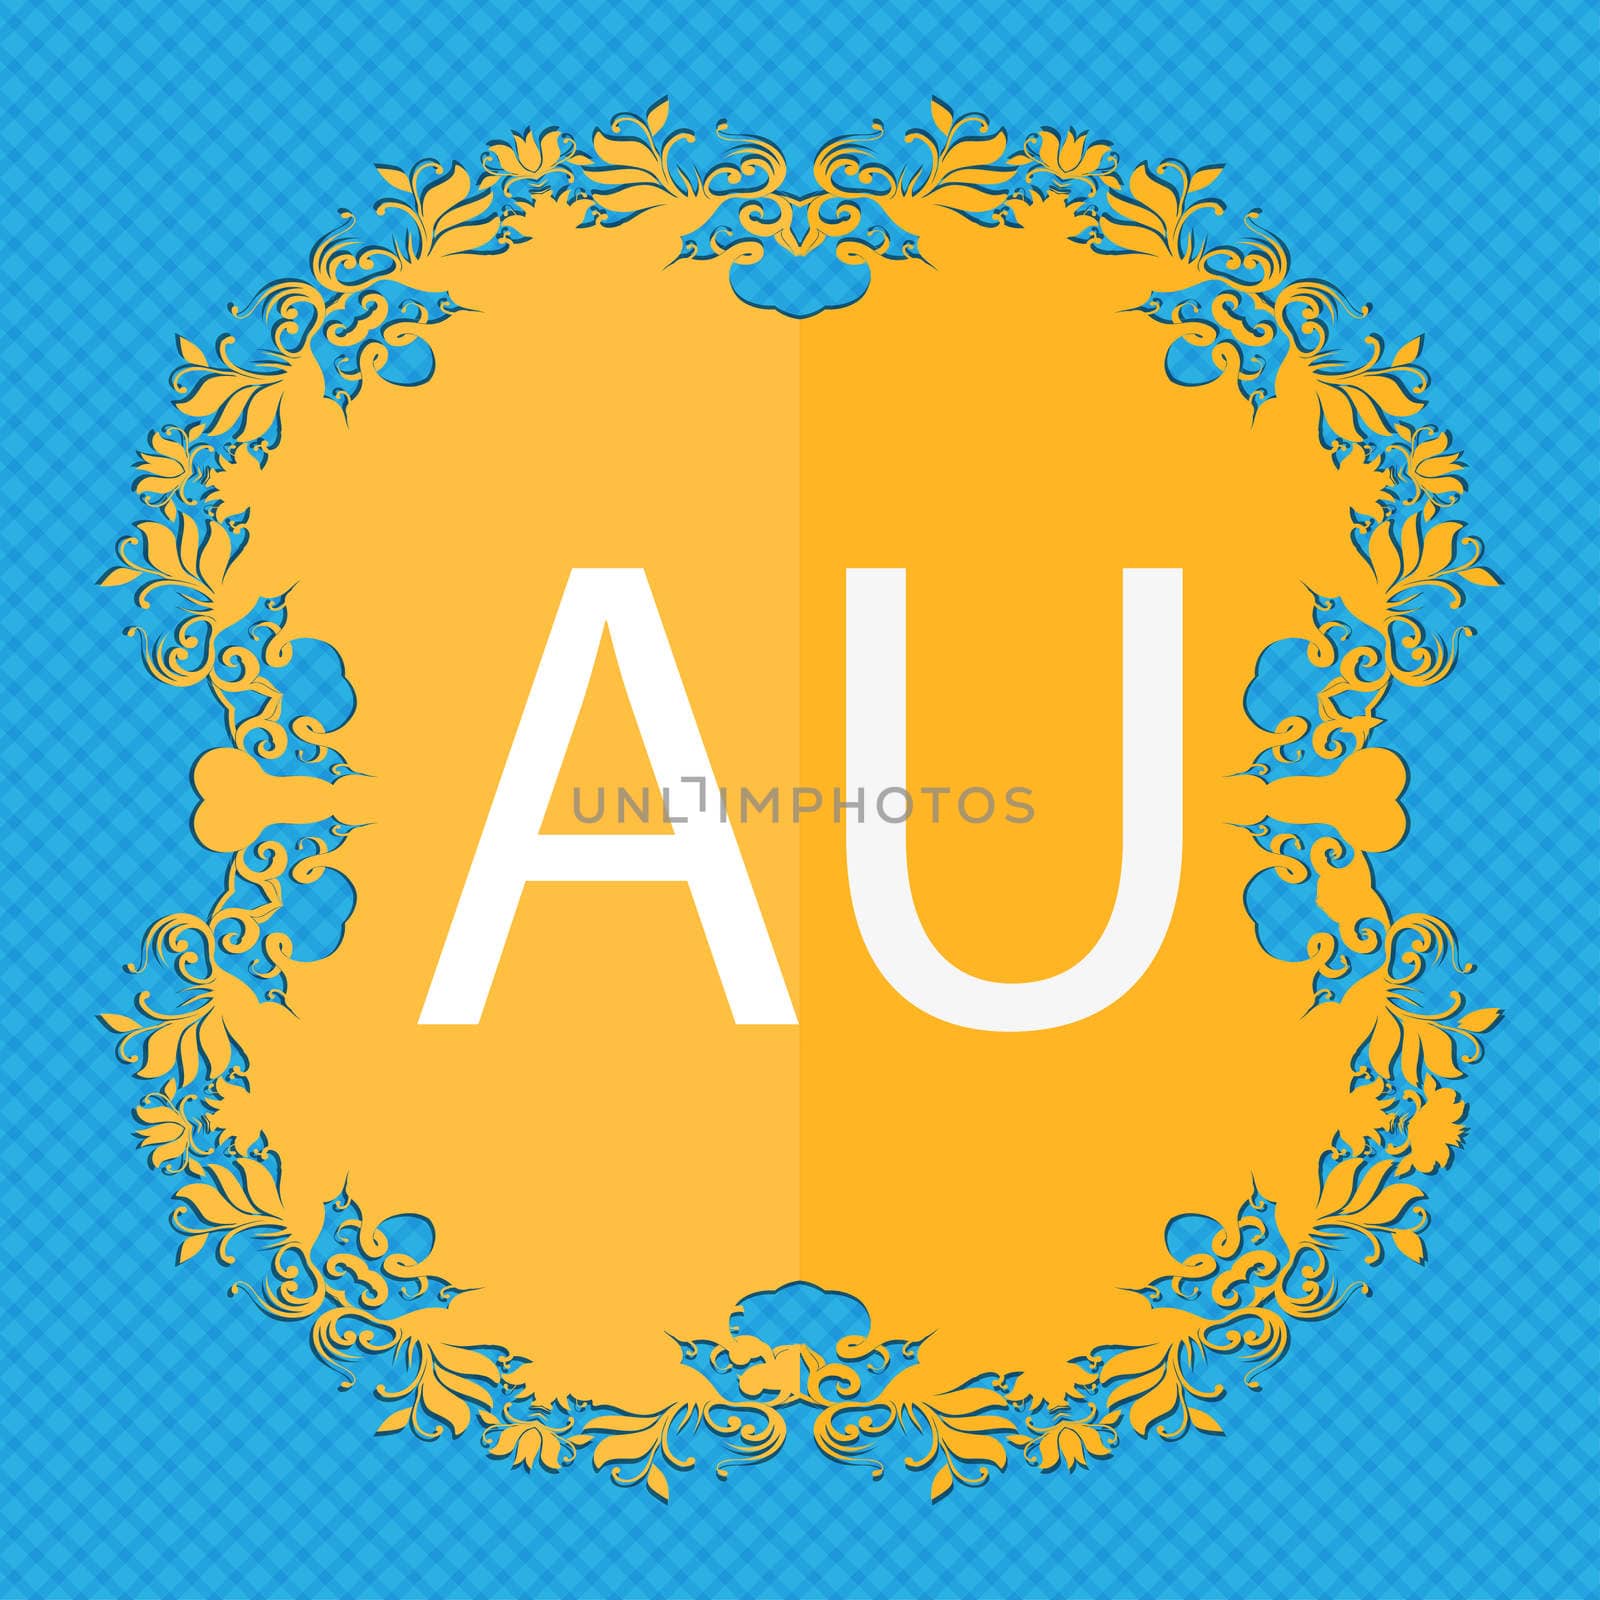 australia sign icon. Floral flat design on a blue abstract background with place for your text. illustration